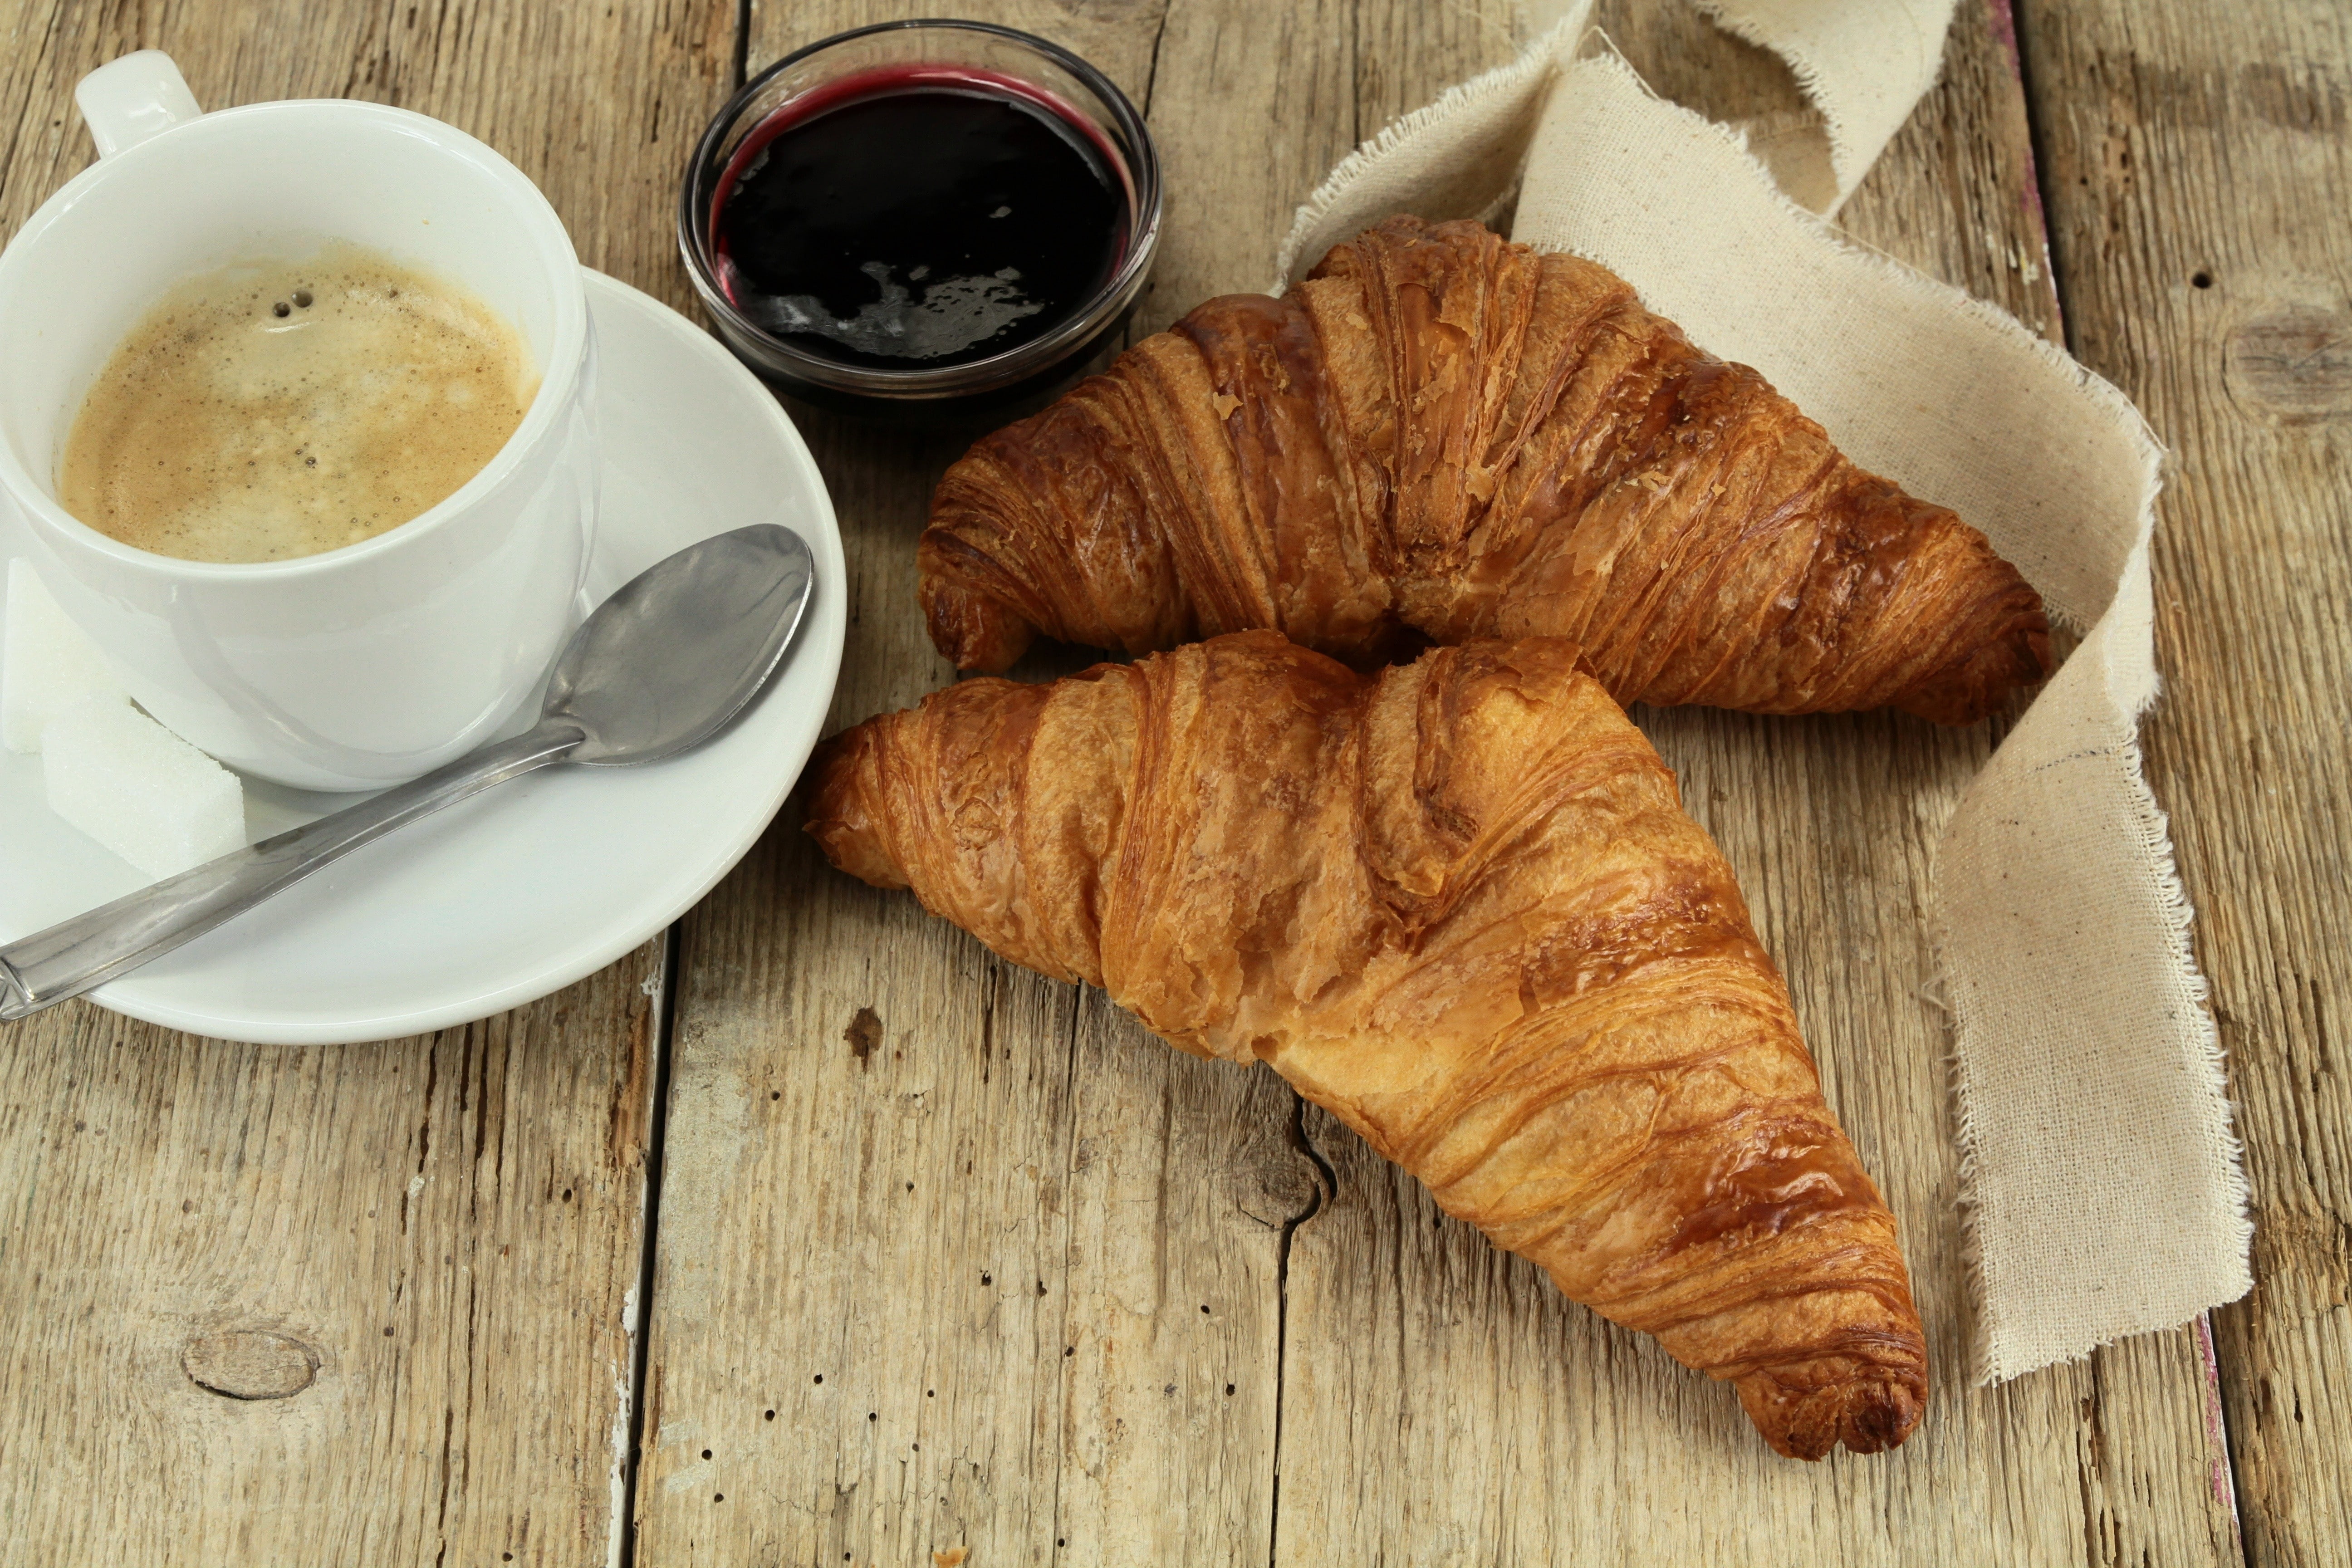 food, croissants, coffee, wooden surface